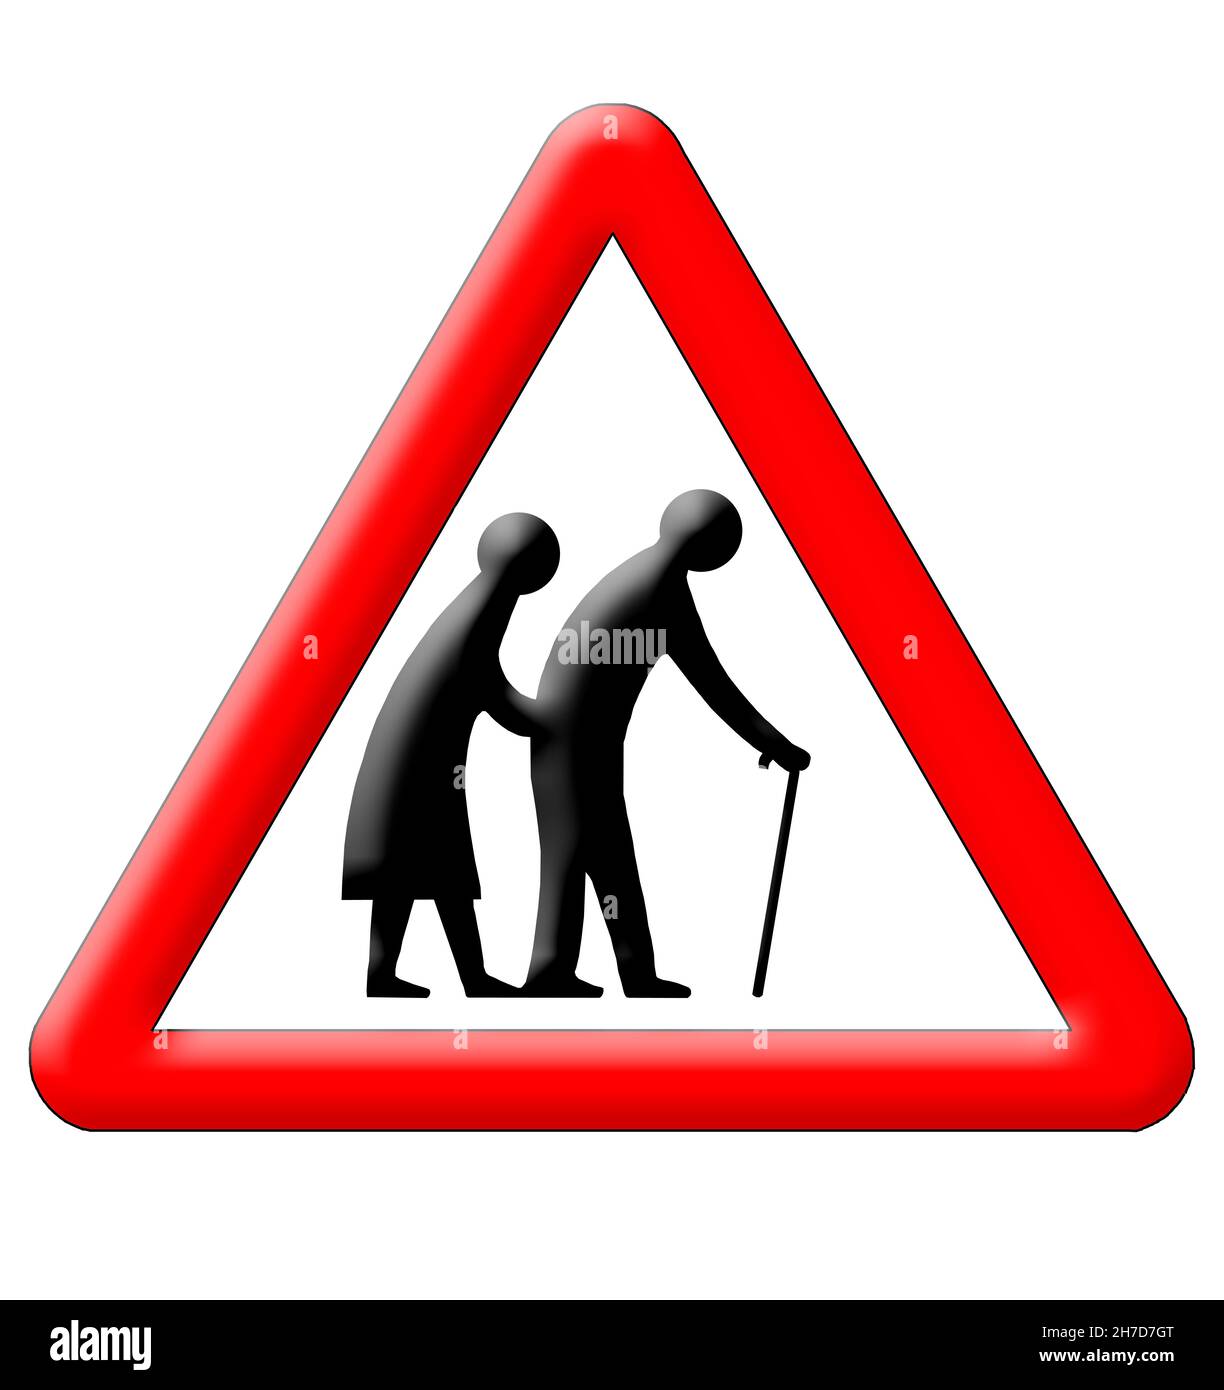 Old people crossing traffic sign isolated over white background Stock Photo